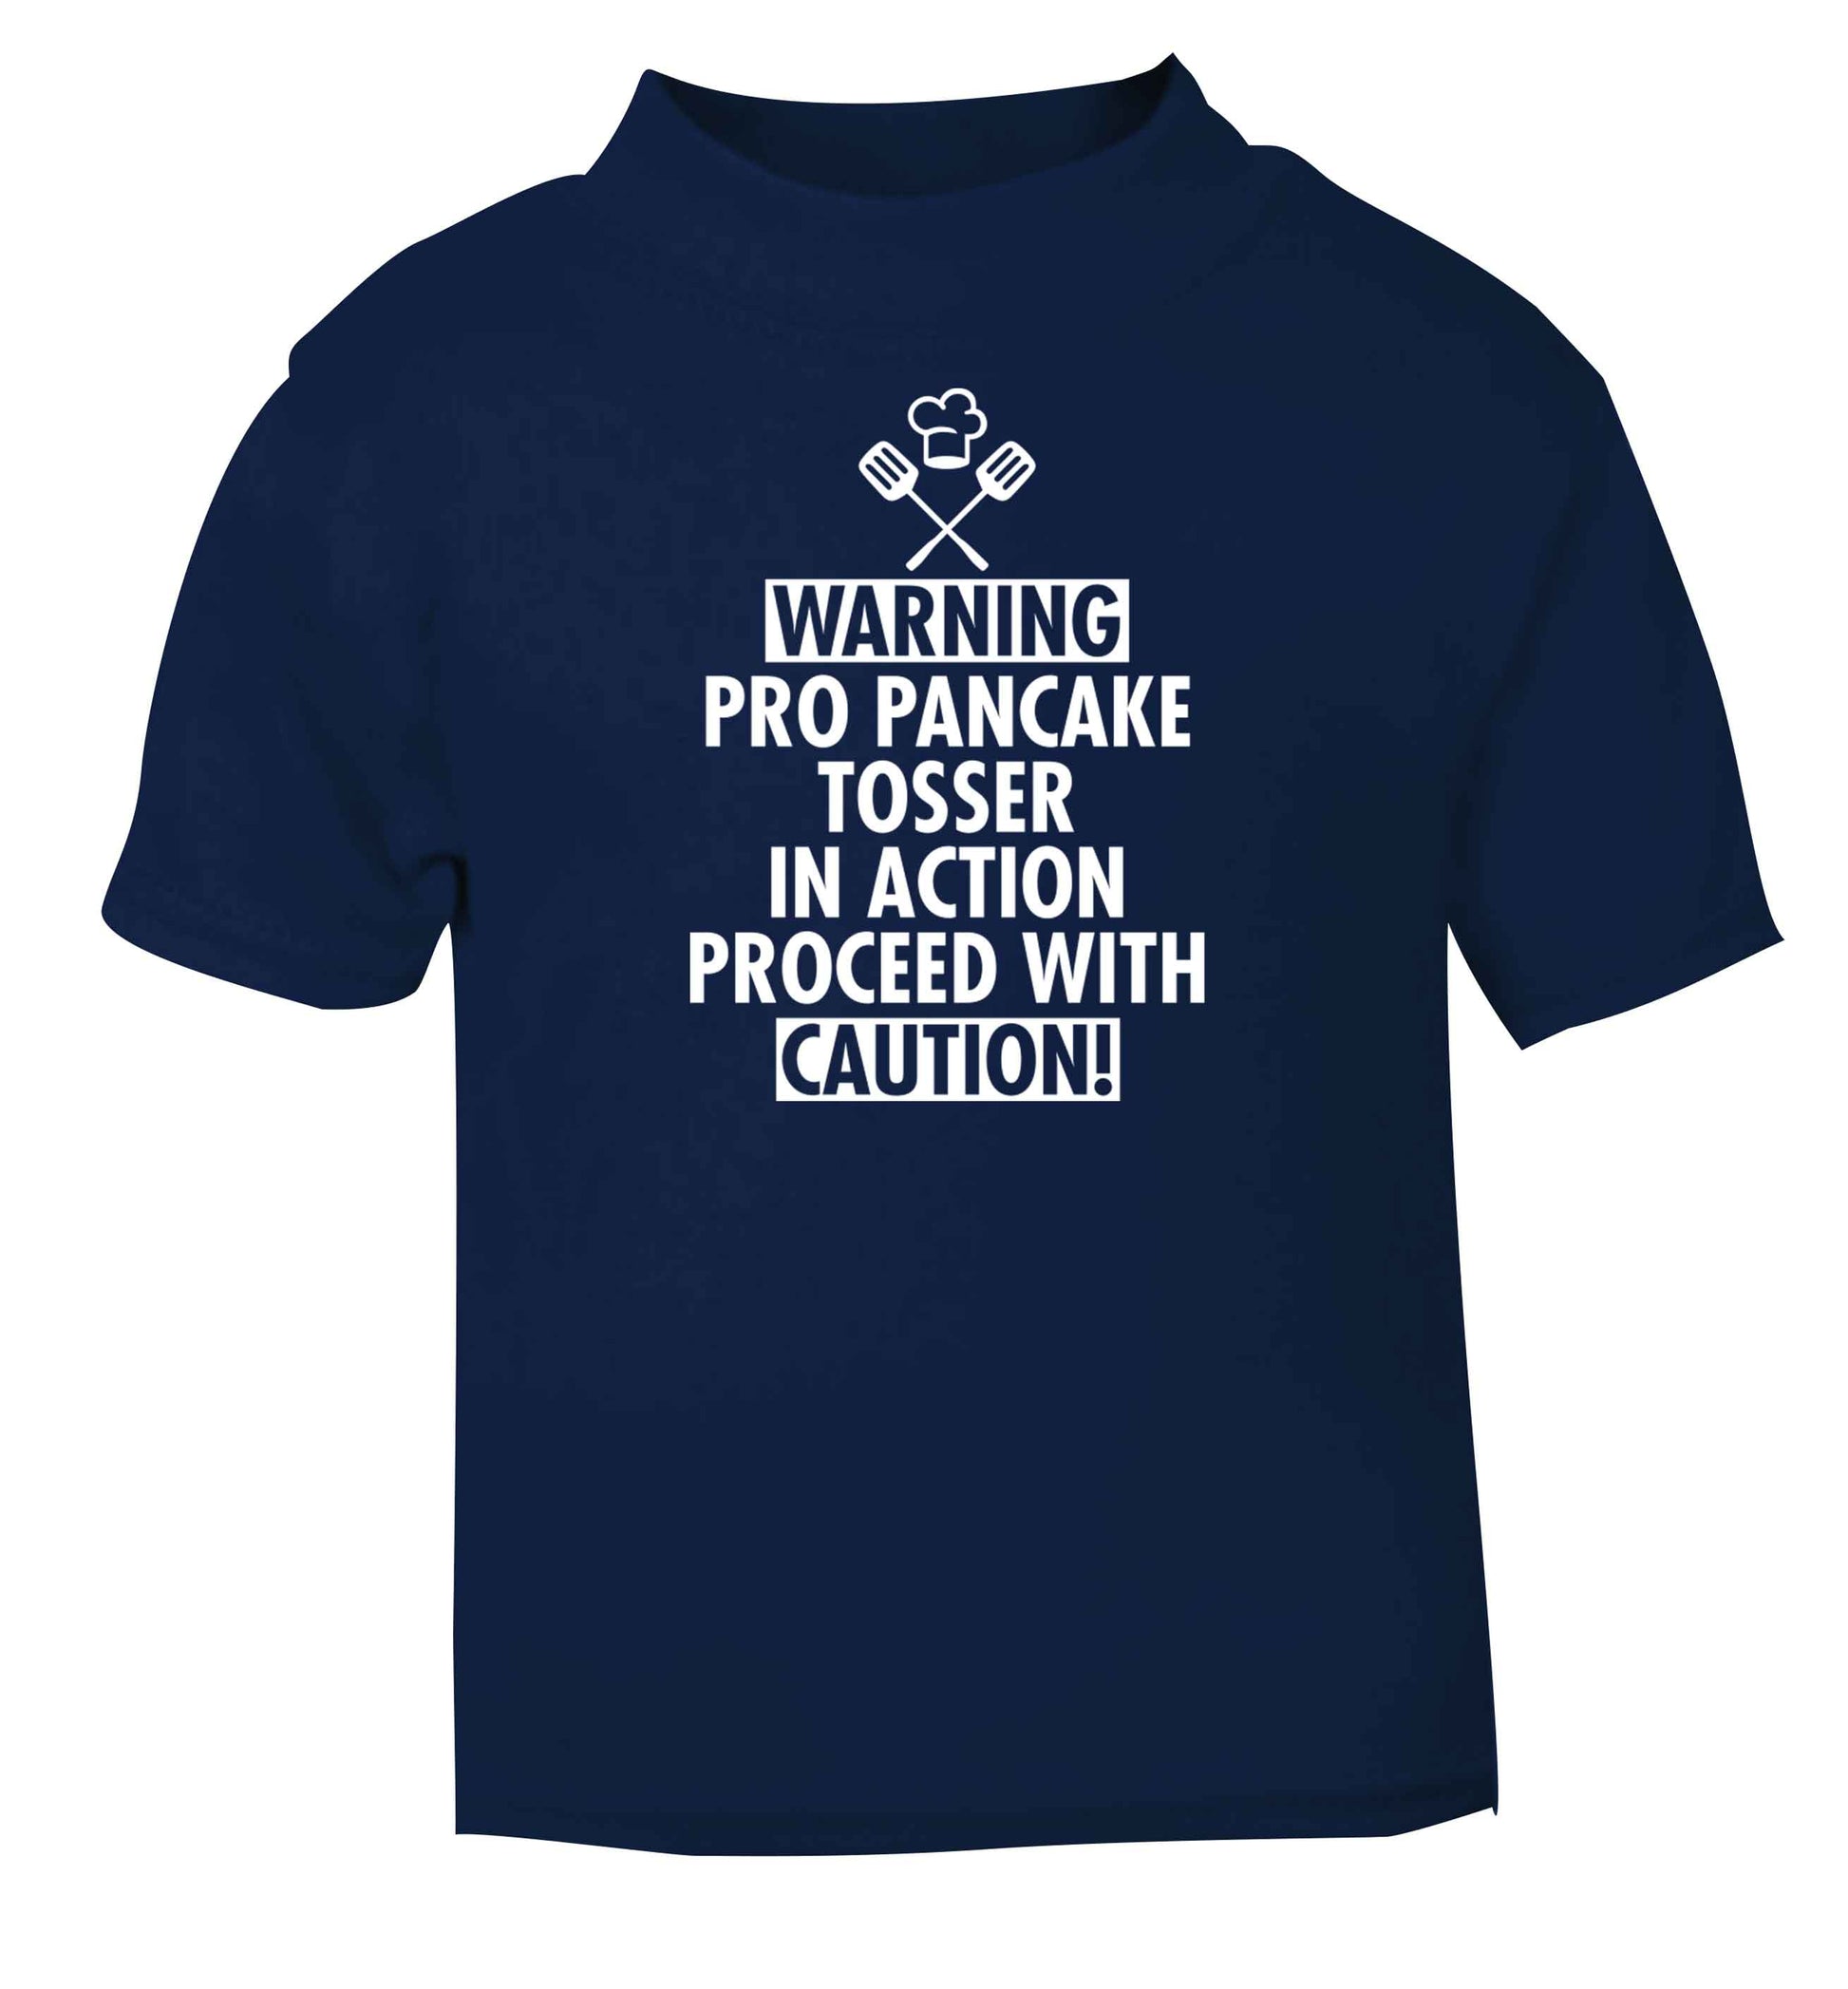 Warning pro pancake tosser in action proceed with caution navy baby toddler Tshirt 2 Years